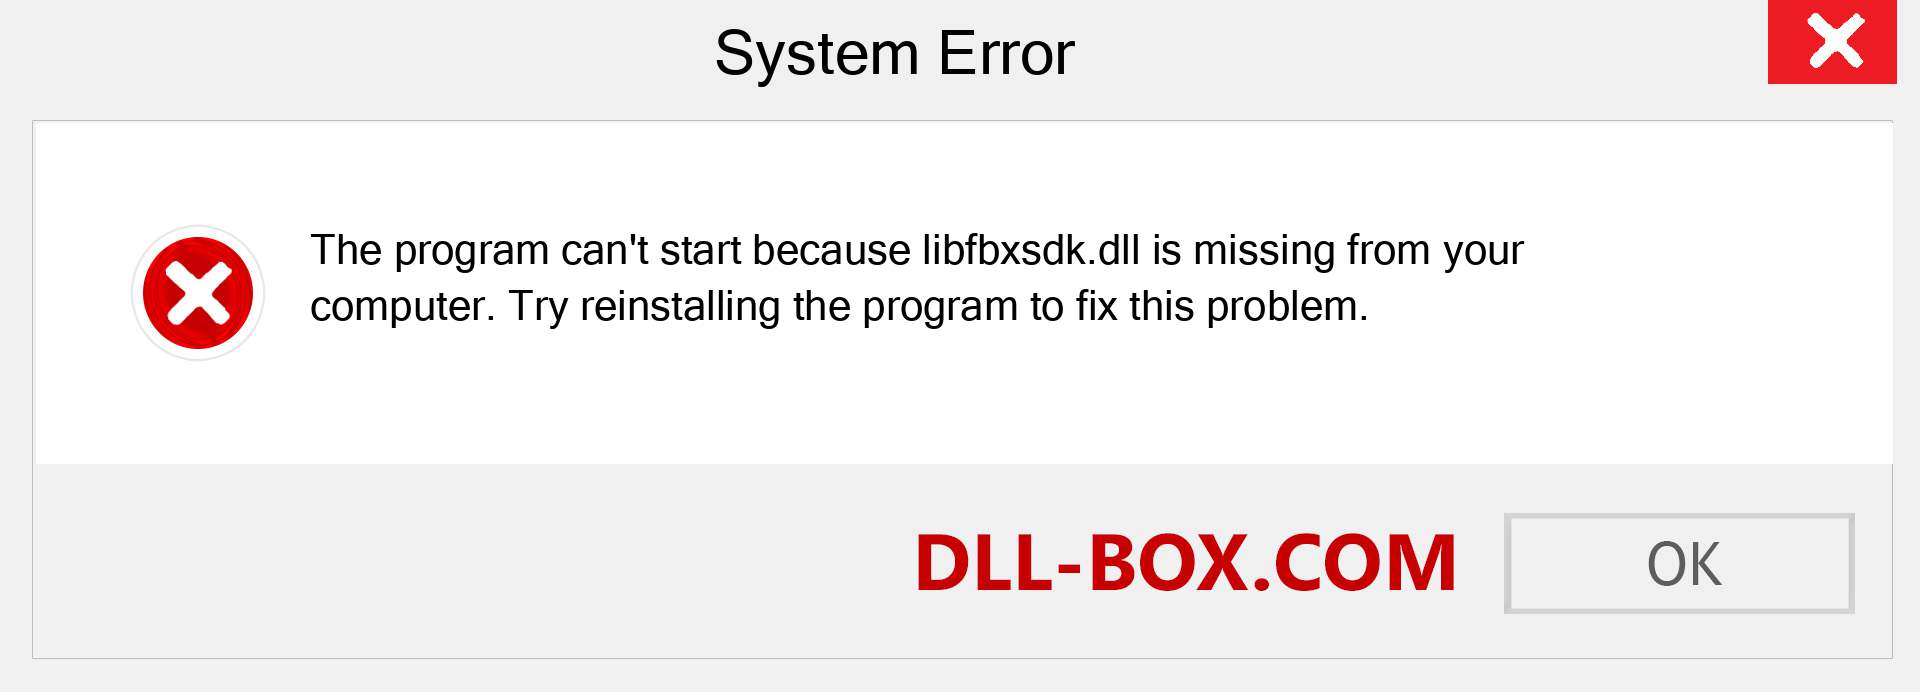  libfbxsdk.dll file is missing?. Download for Windows 7, 8, 10 - Fix  libfbxsdk dll Missing Error on Windows, photos, images